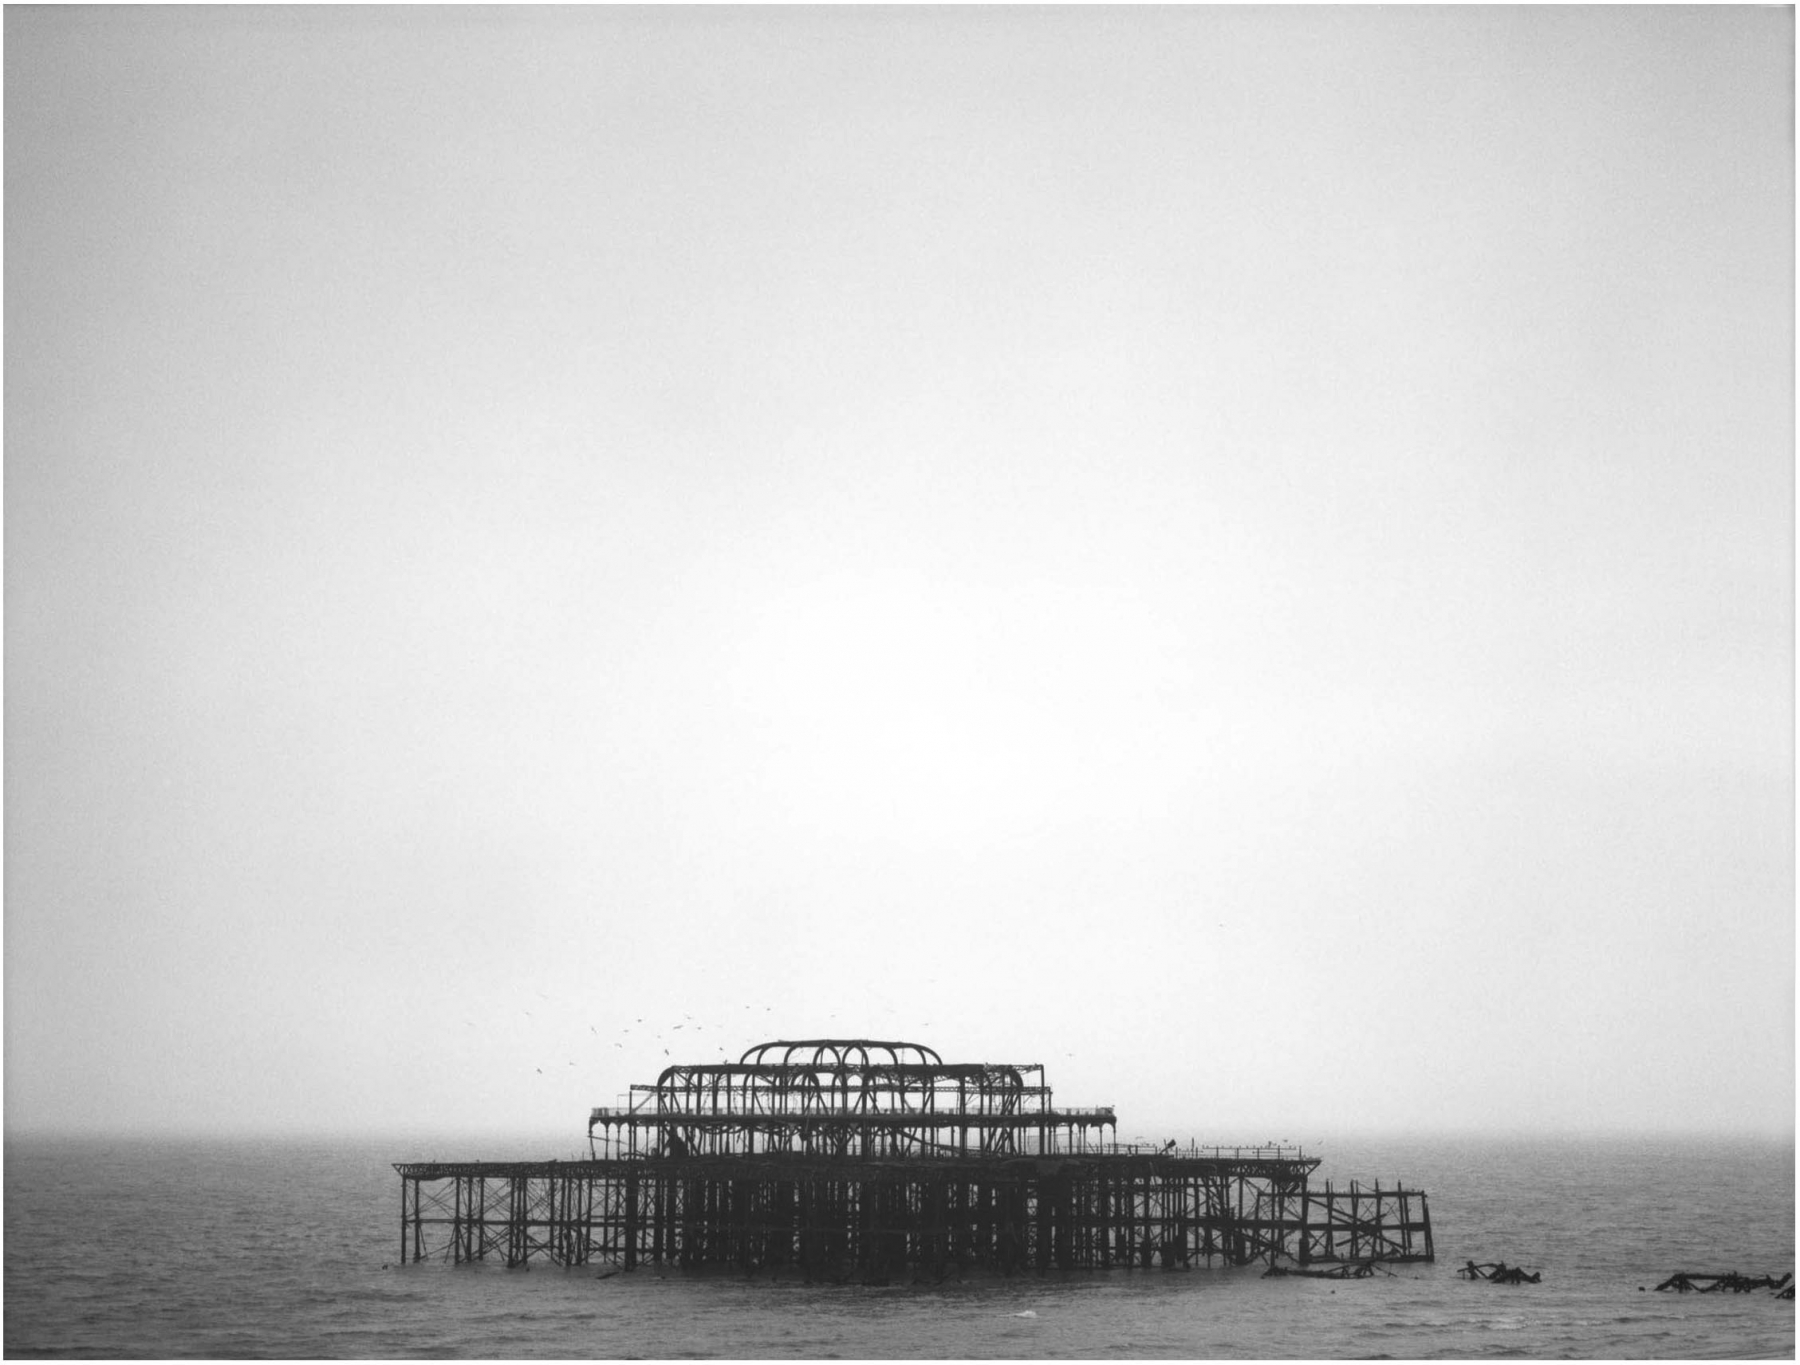 &amp;nbsp;

FIONA TAN

&amp;nbsp;

West Pier I
2006
black and white photograph printed on Baryta paper
23 1/4 x 31 1/8 inches
&amp;nbsp; (59.1 x 79.1 cm)
Edition 4 of 6
PF2014

&amp;nbsp;